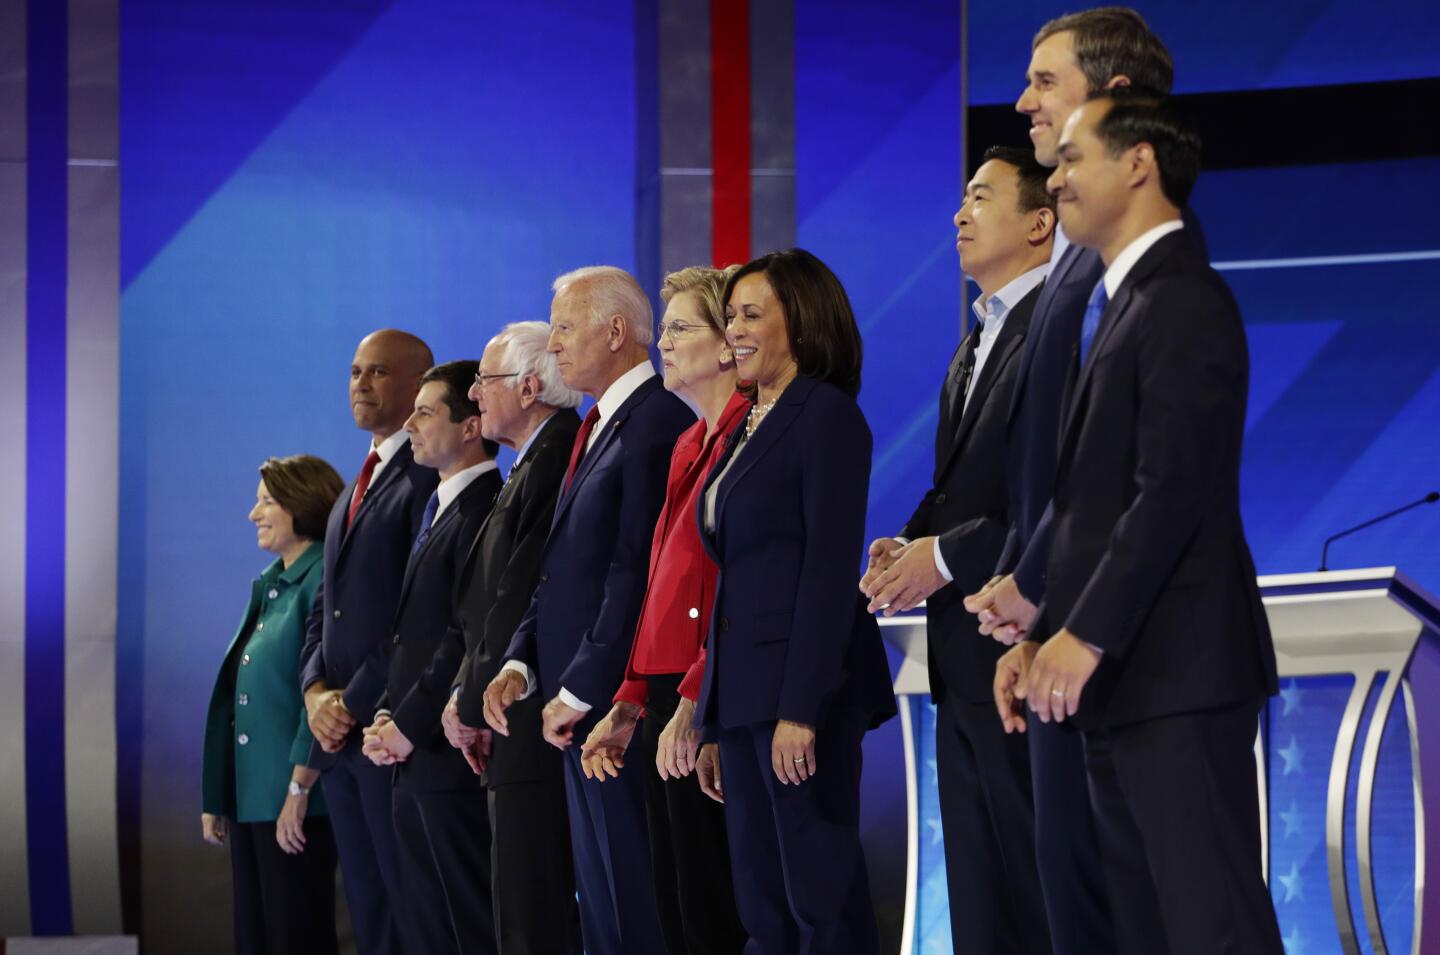 The 10 candidates take the stage before Thursday's debate.